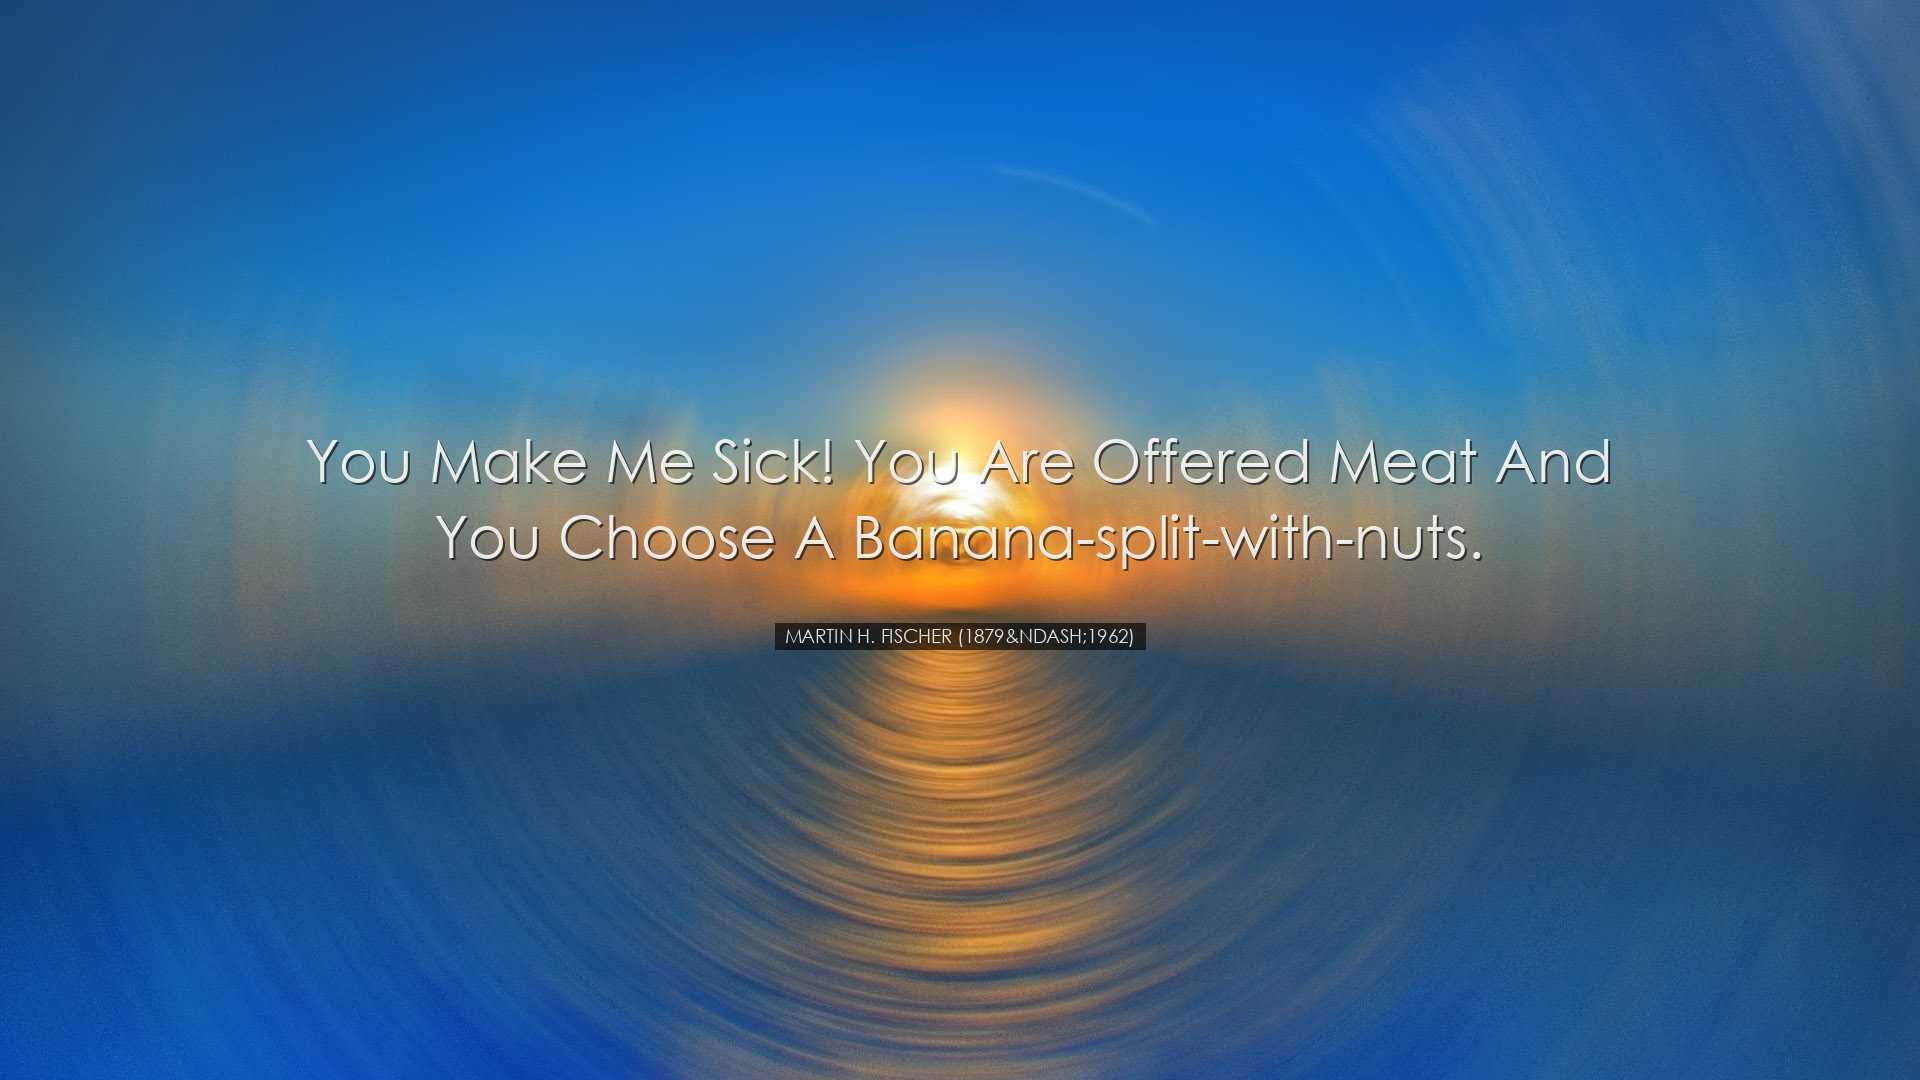 You make me sick! You are offered meat and you choose a banana-spl